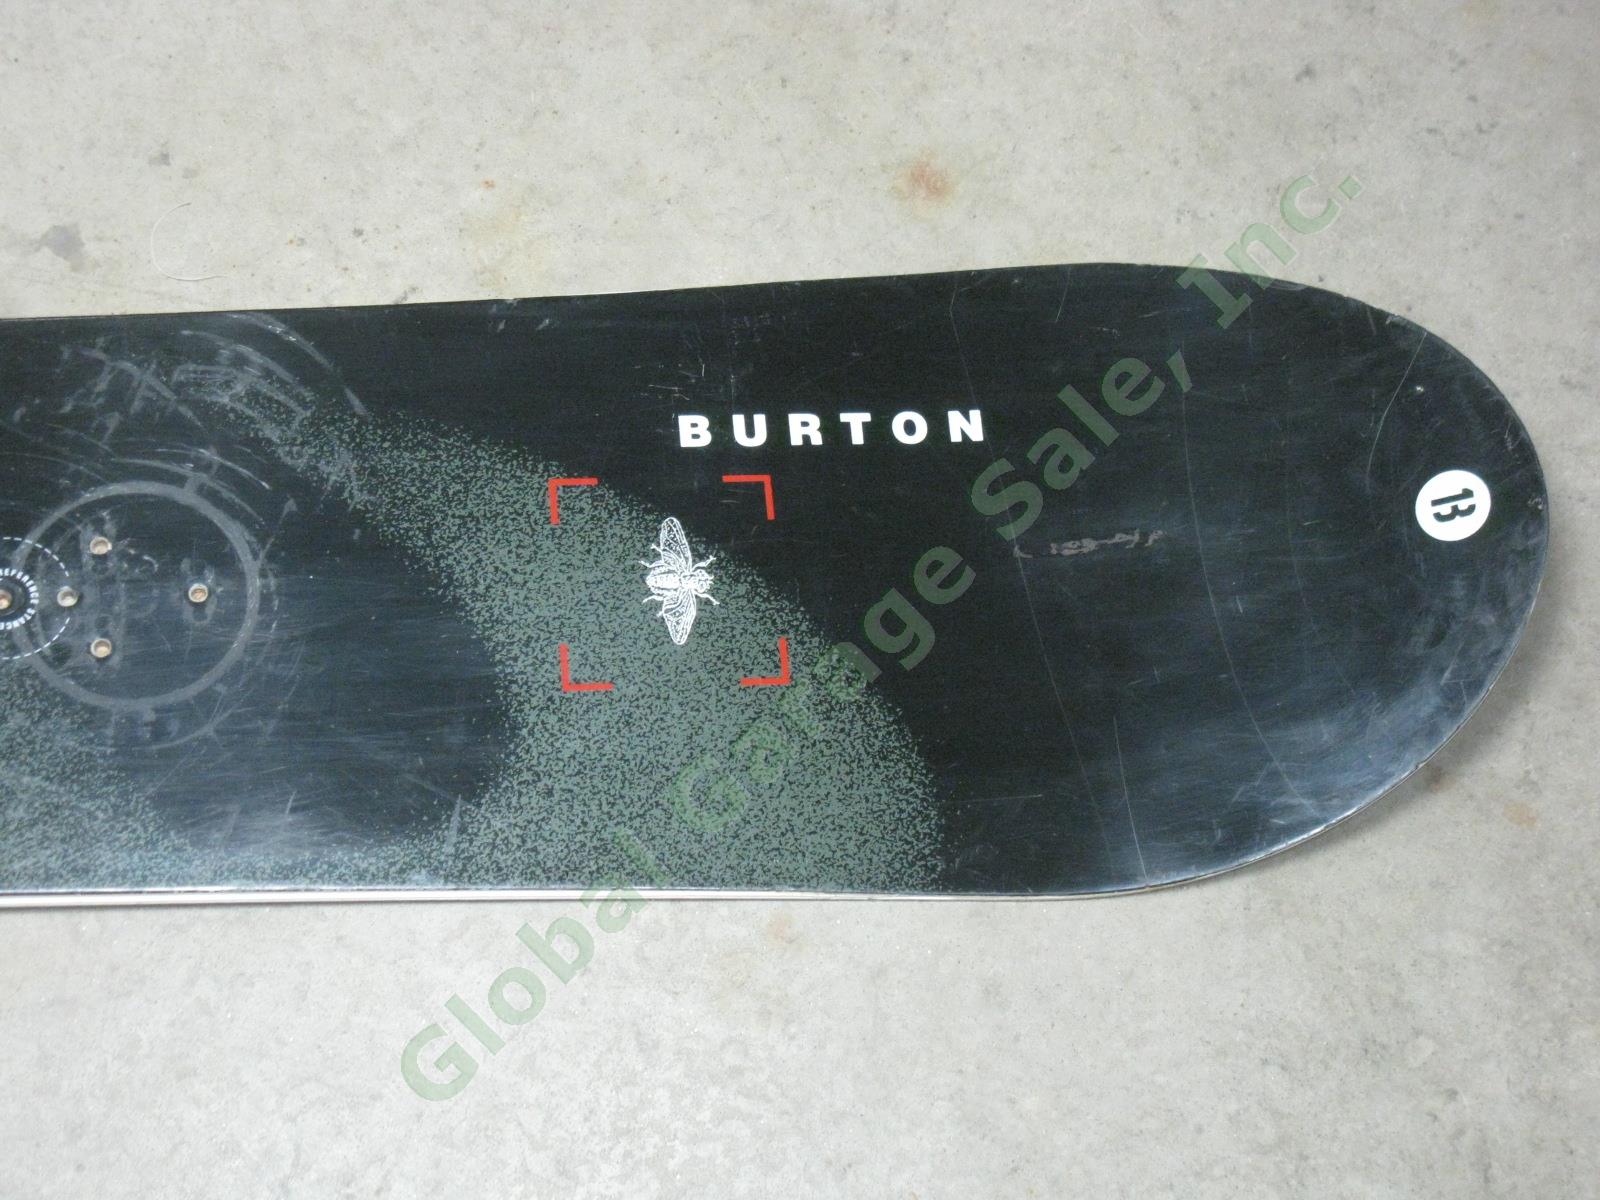 Vintage 1993 Burton Air 6.1 Snowboard Fly Graphic Wood Core USA Made 159cm NR 1